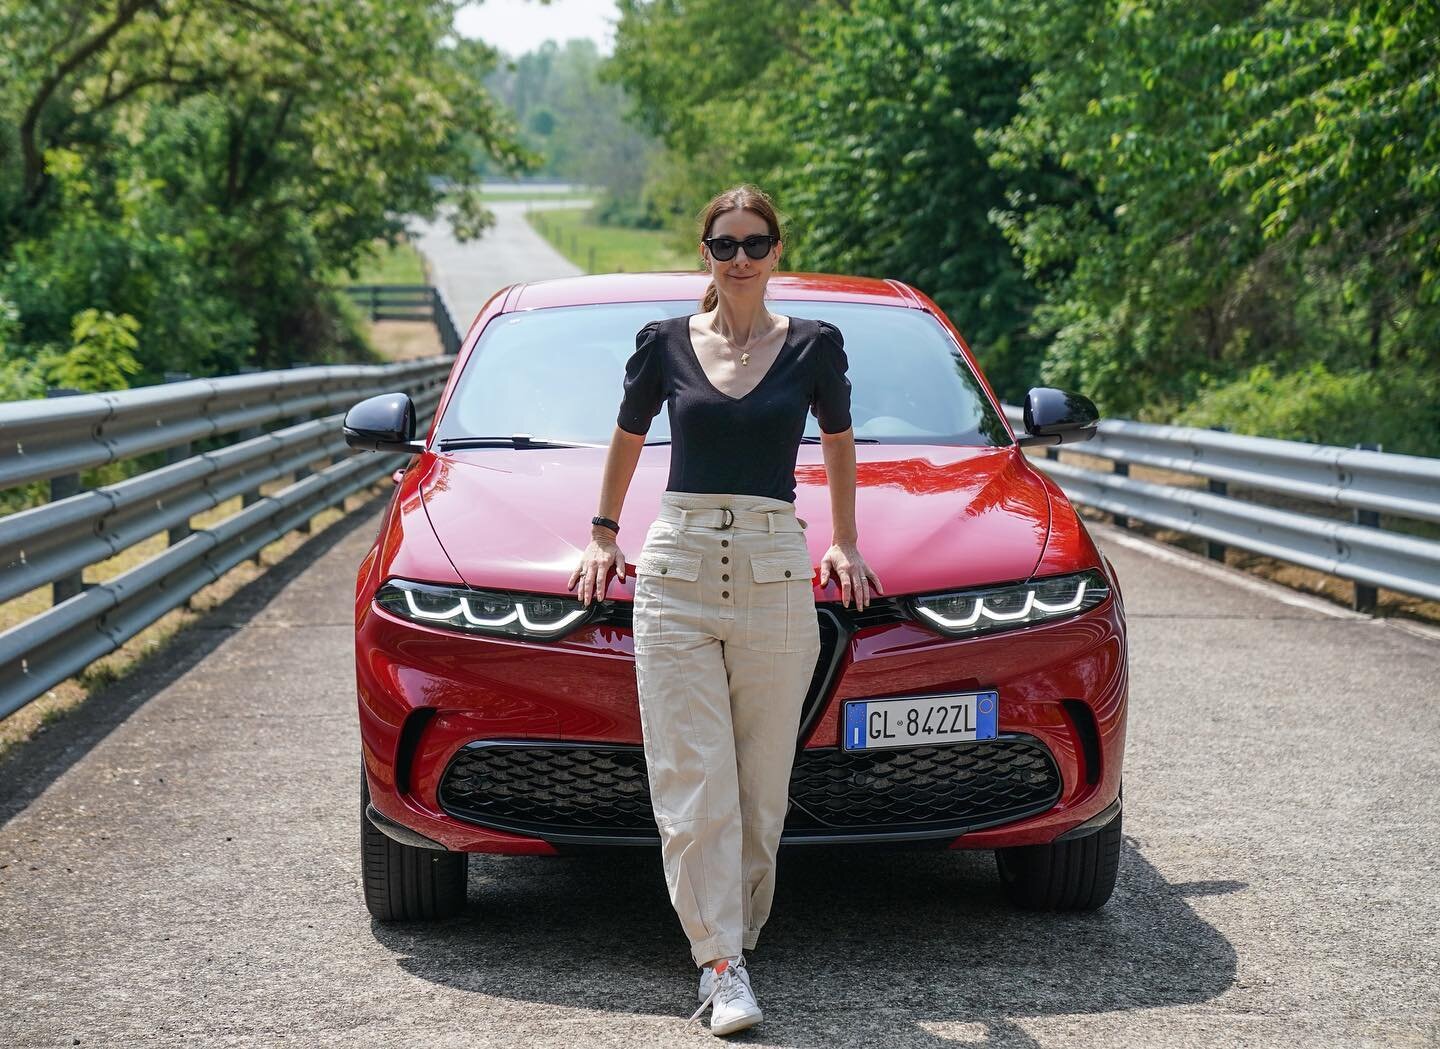 &ldquo;Alfa Romeo driving isn&rsquo;t subtle.&rdquo; In Italy, @tamarawarren takes the wheel of the @alfaromeousa Tonale plug-in hybrid that&rsquo;s about to land stateside.